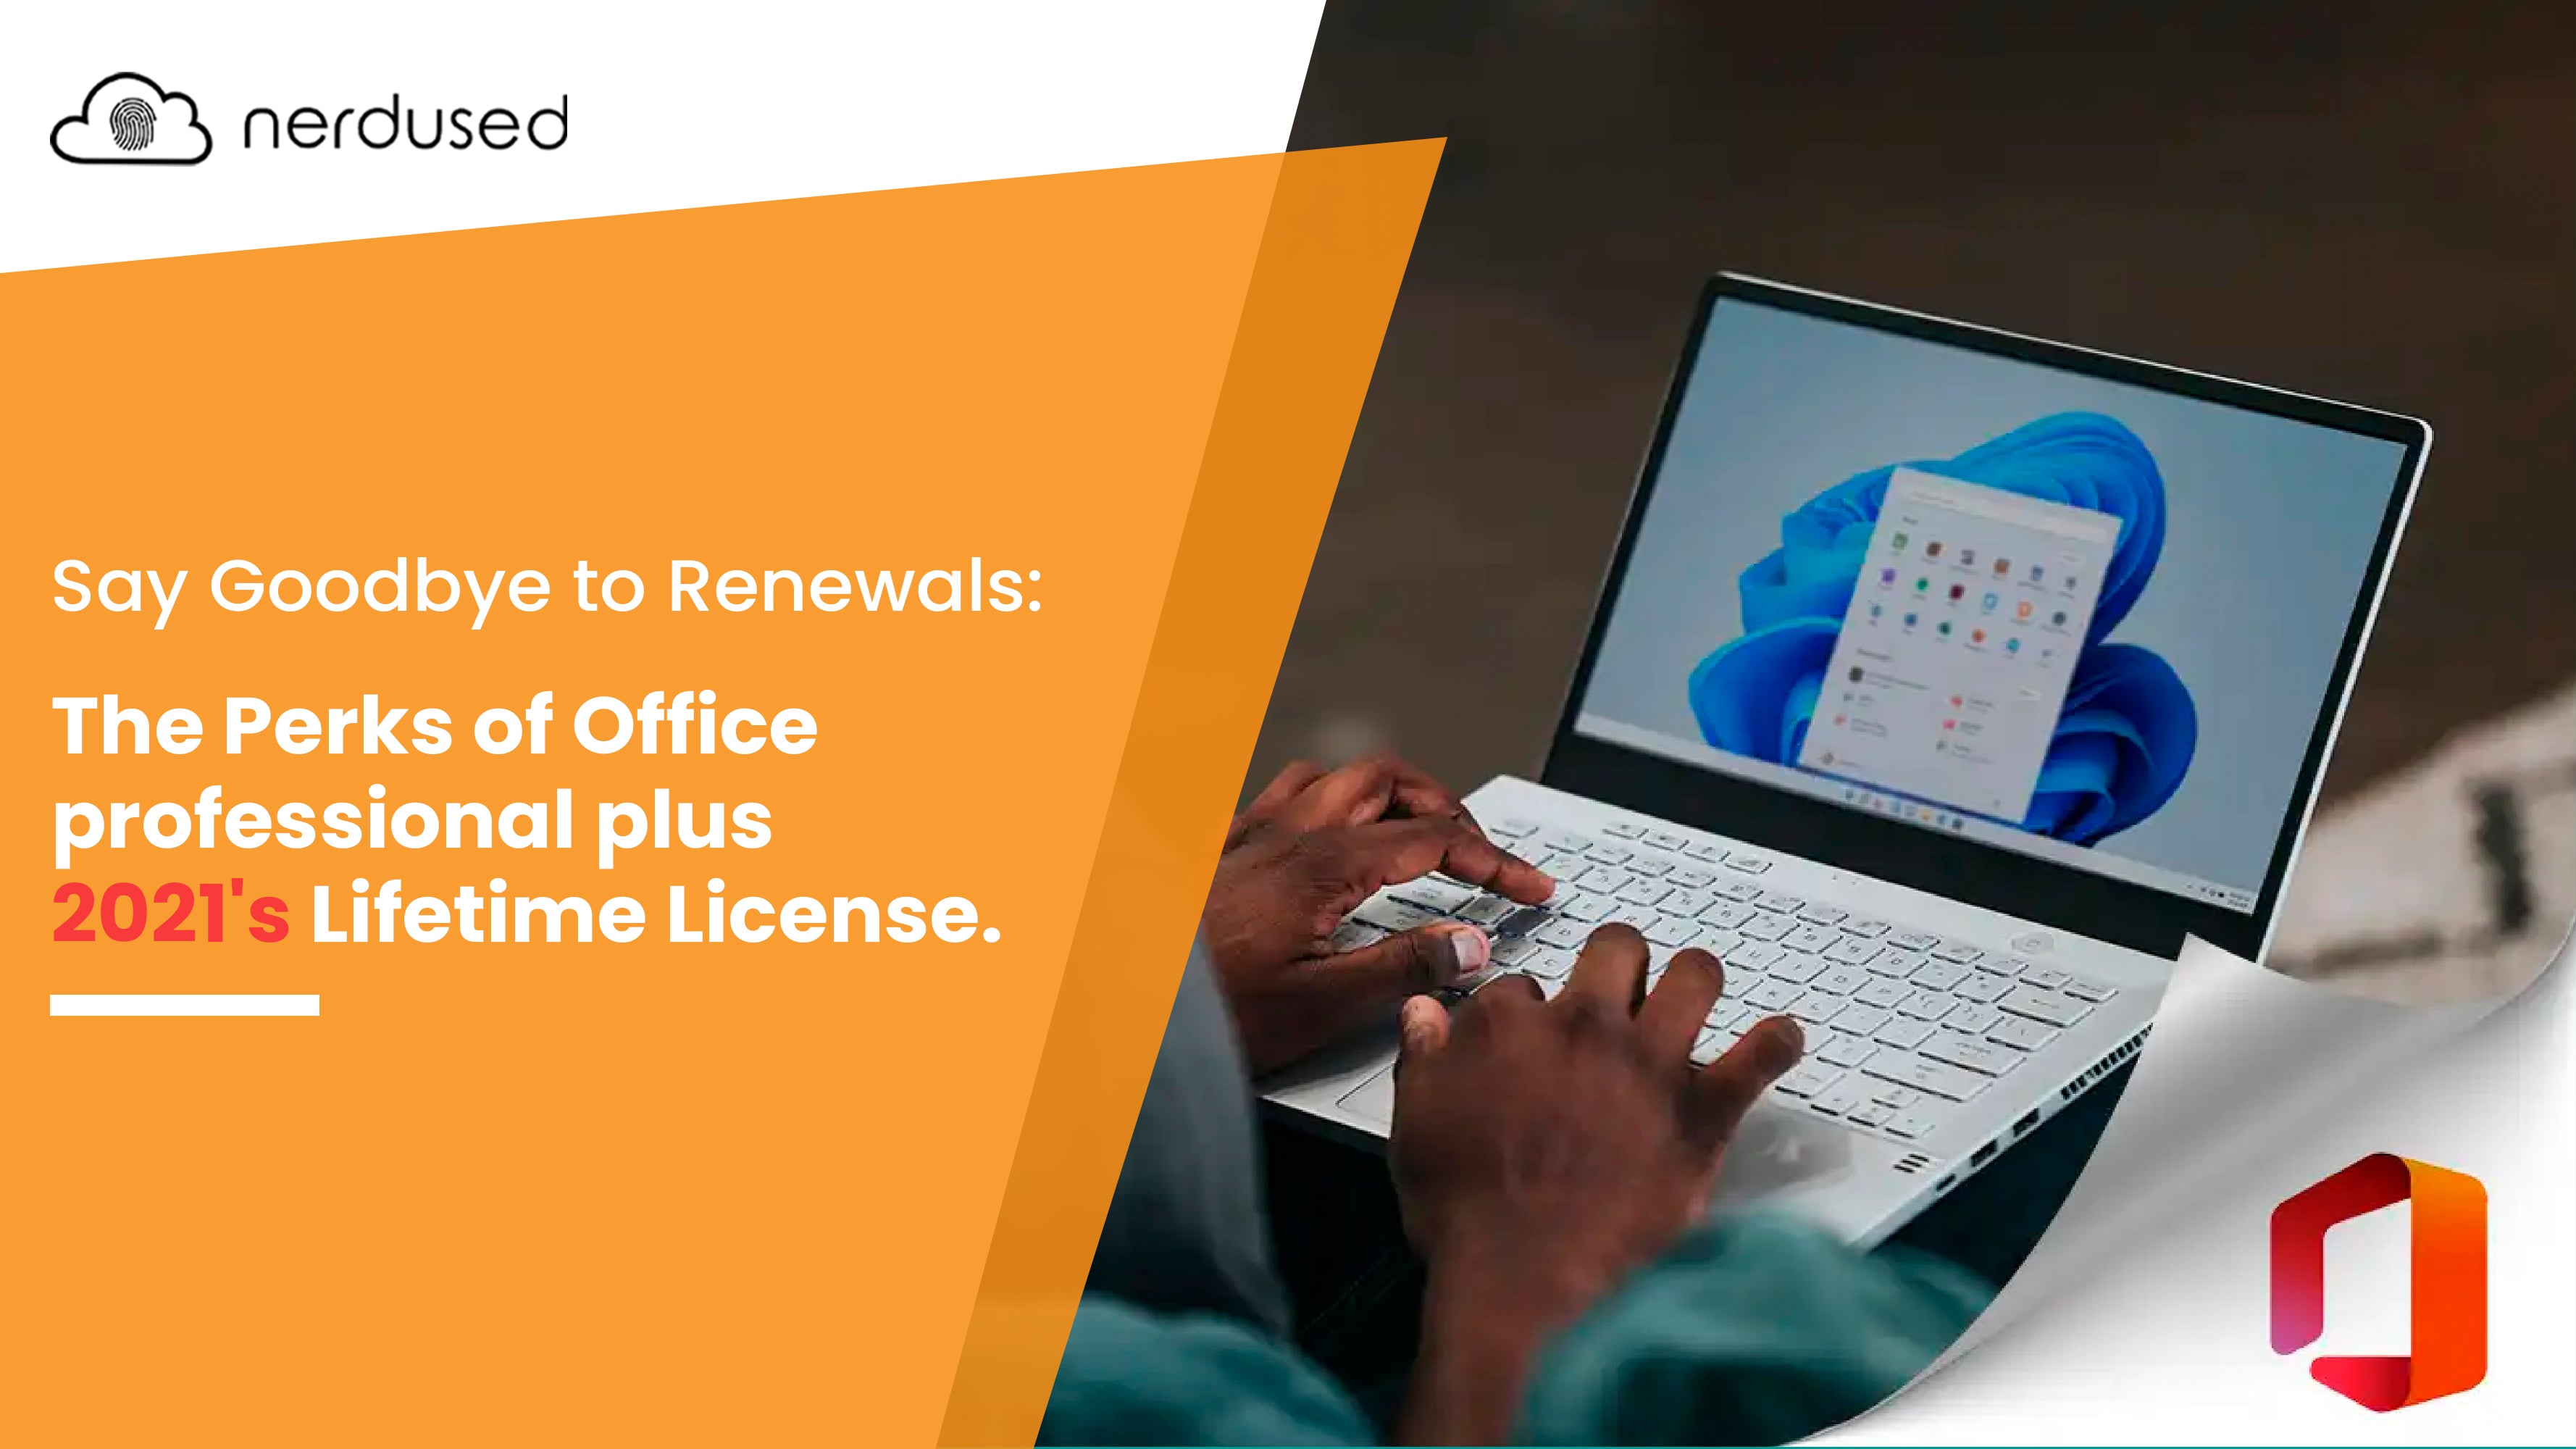 Say Goodbye to Renewals: The Perks of Office professional plus 2021's Lifetime License.